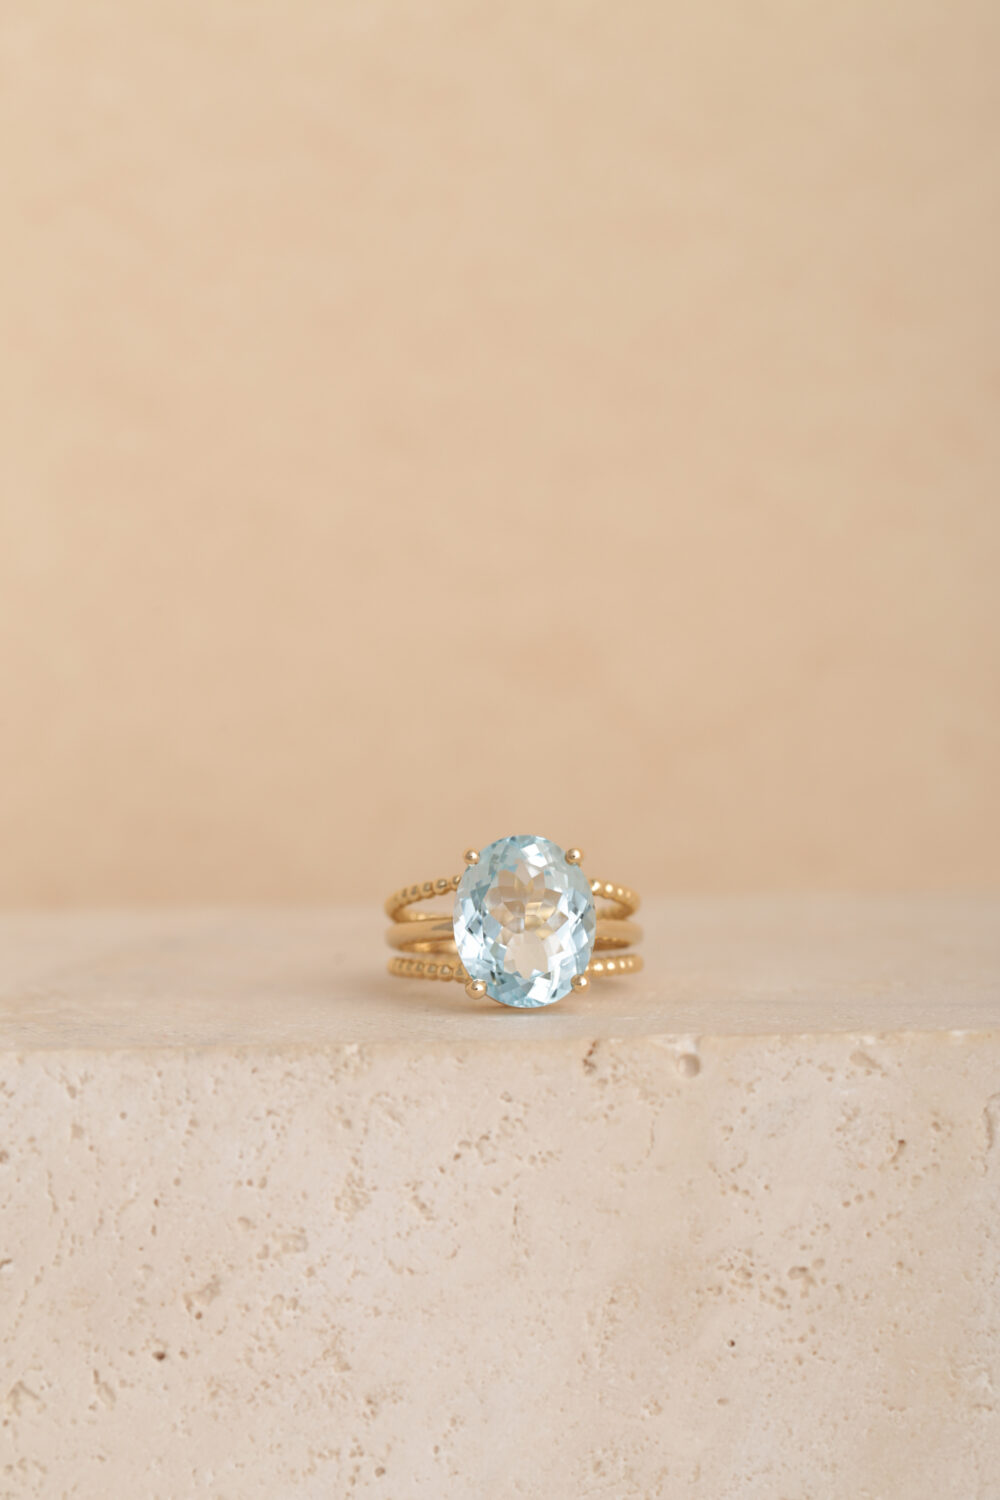 Oval aquamarine ring in 18-karat yellow gold set with a Aquamarine gemstone. All our jewellery is handmade by jewellery designer Pascale Masselis.